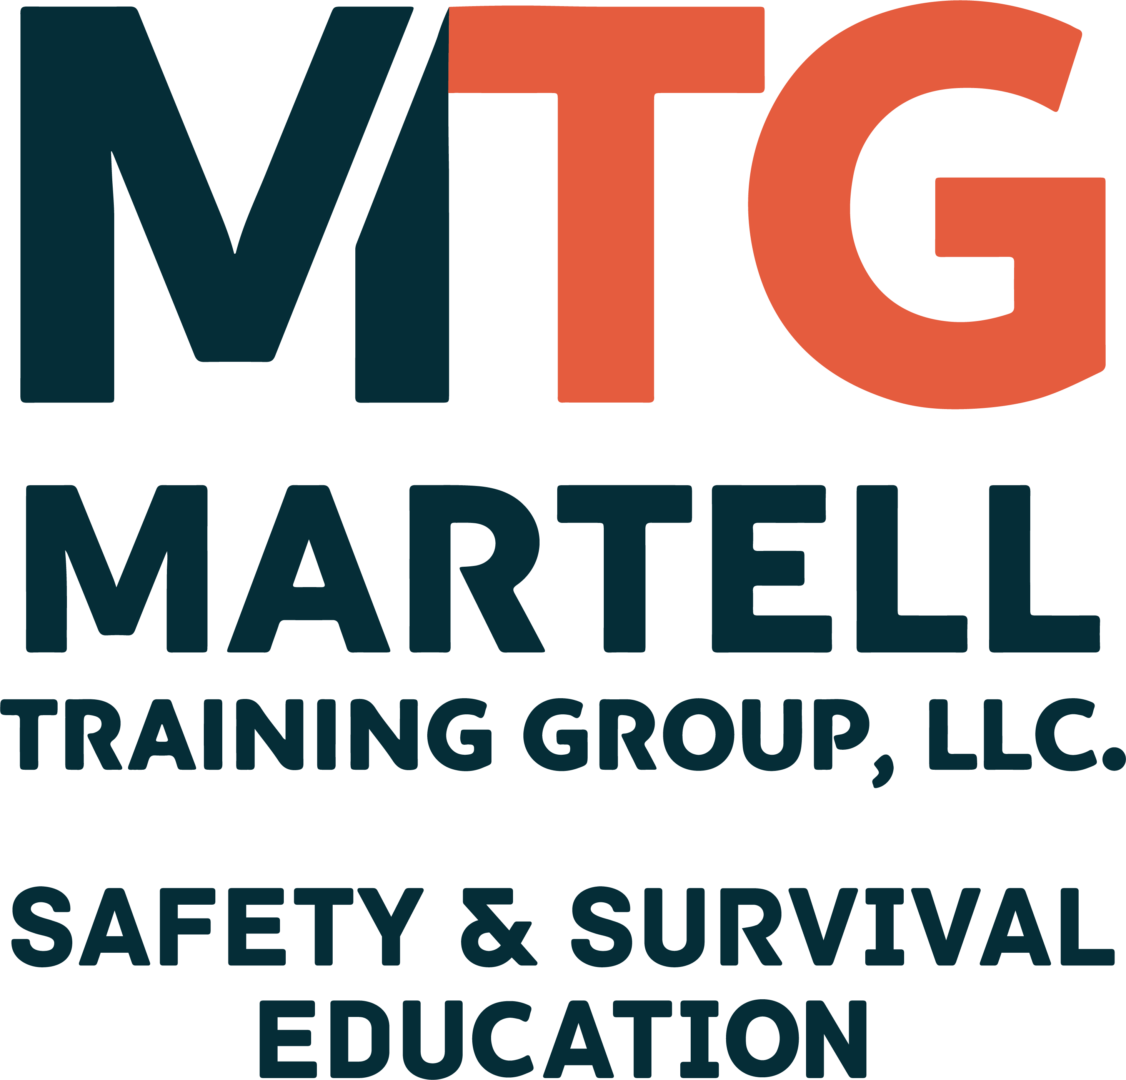 A green and red logo for the martell training group.